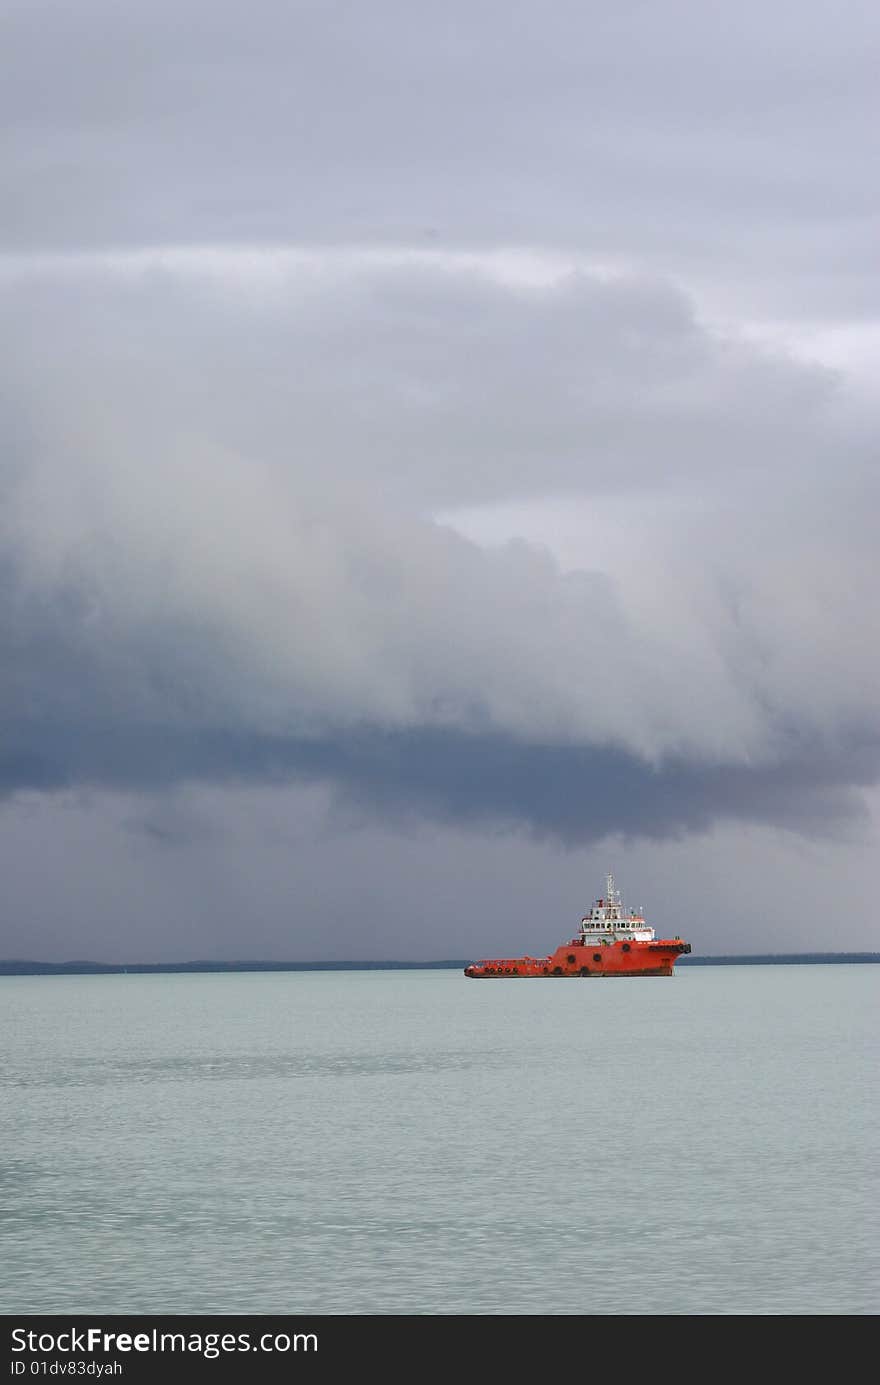 Tug boat heading out into a storm. Tug boat heading out into a storm.